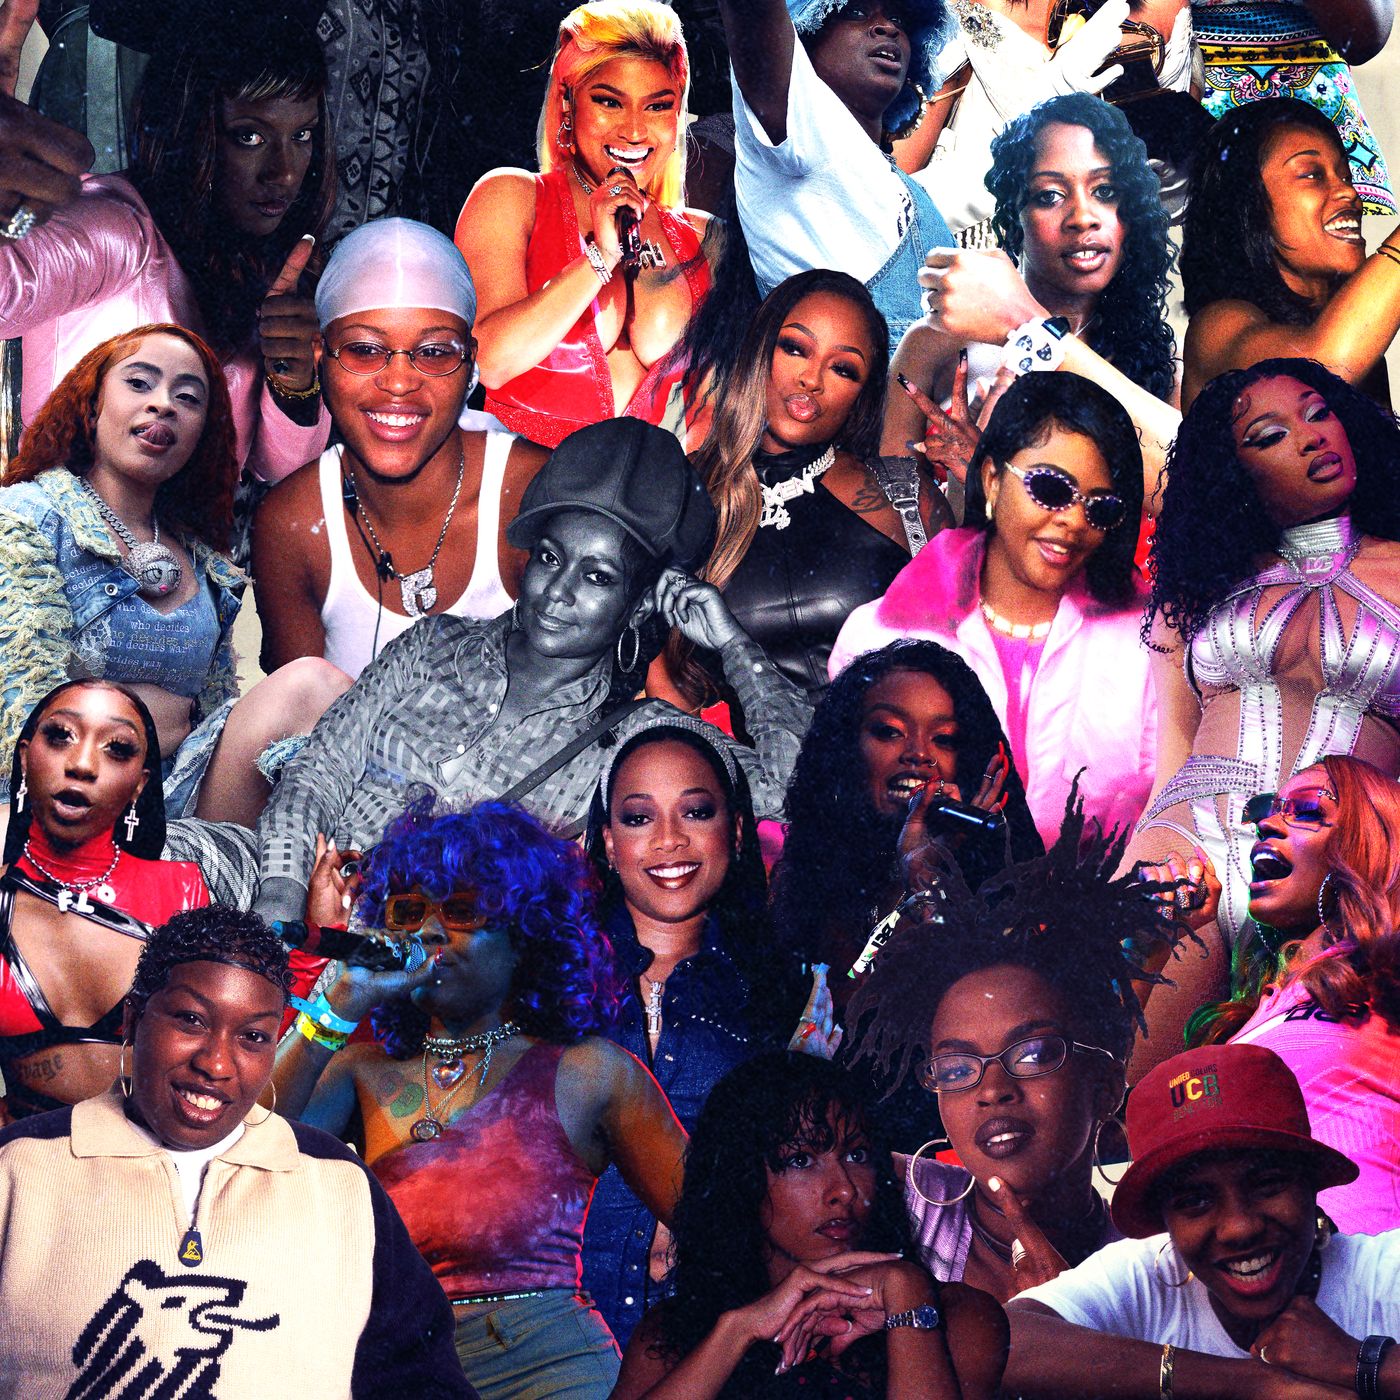 Female Rappers Women In Hip Hop Zodiac Sign Personality